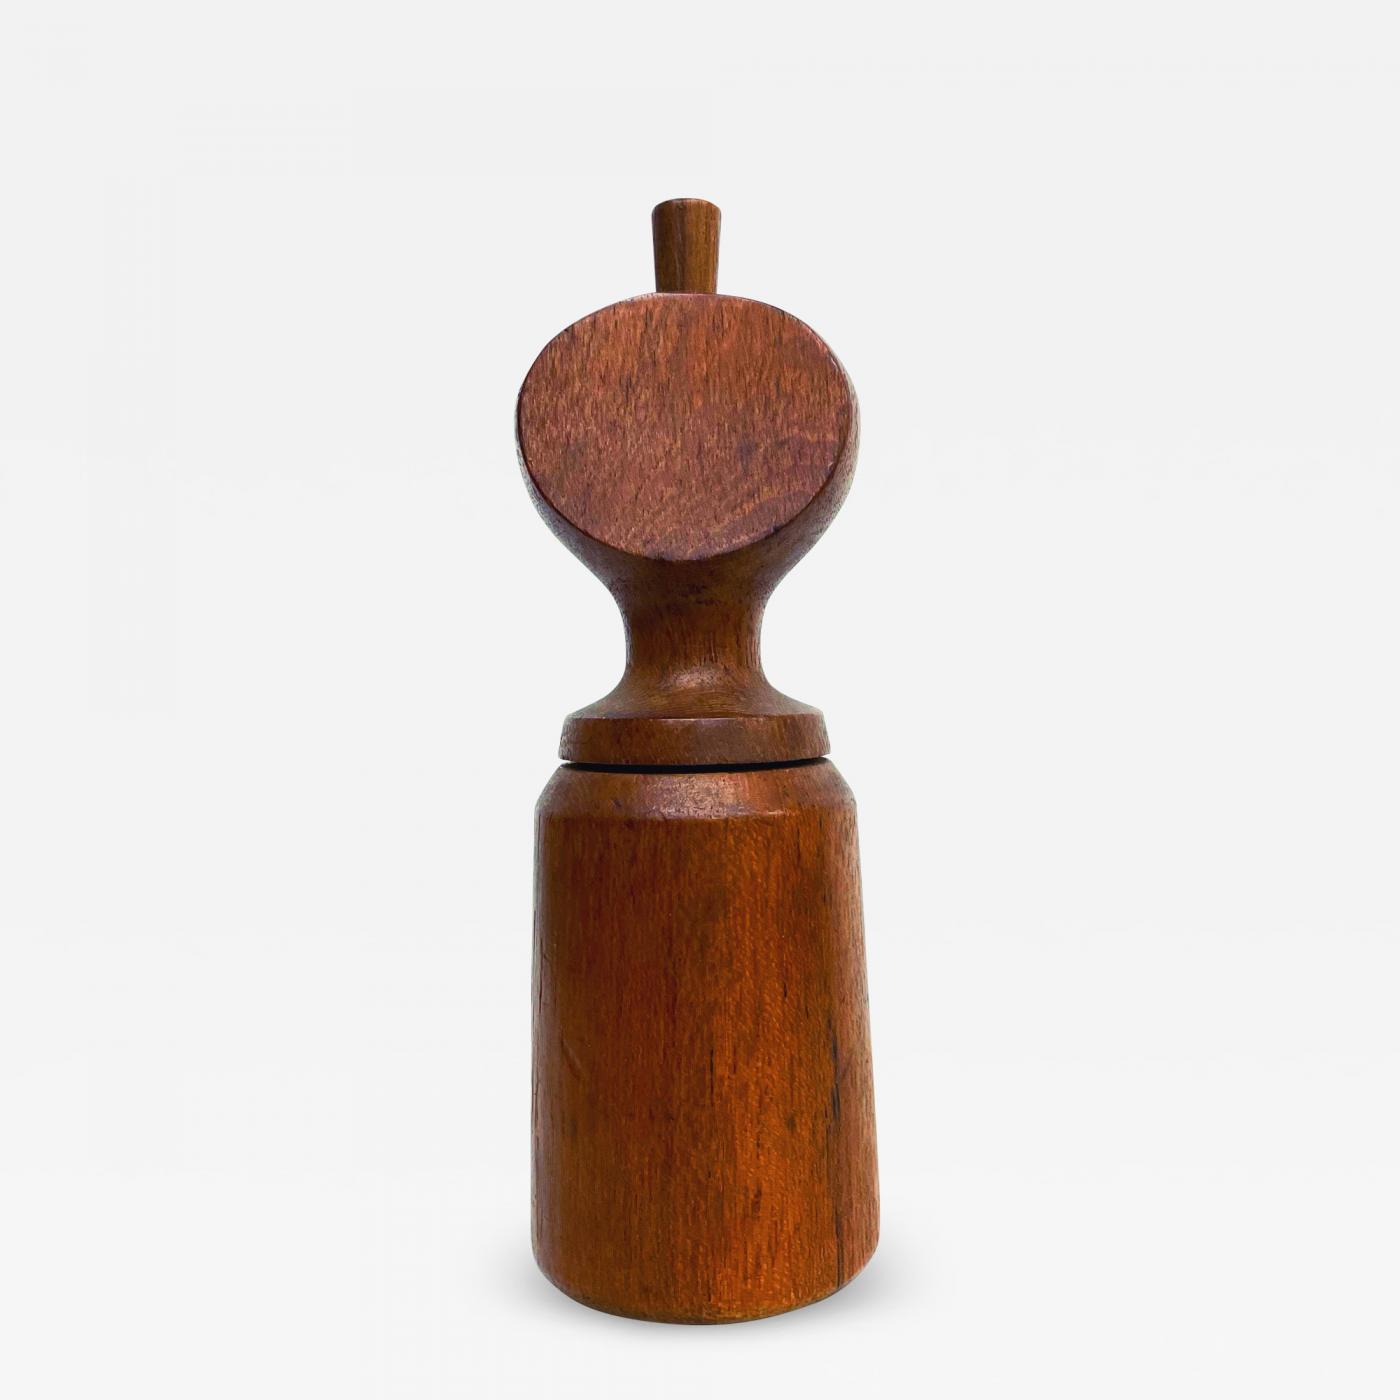 The Peppermills of Jens Quistgaard